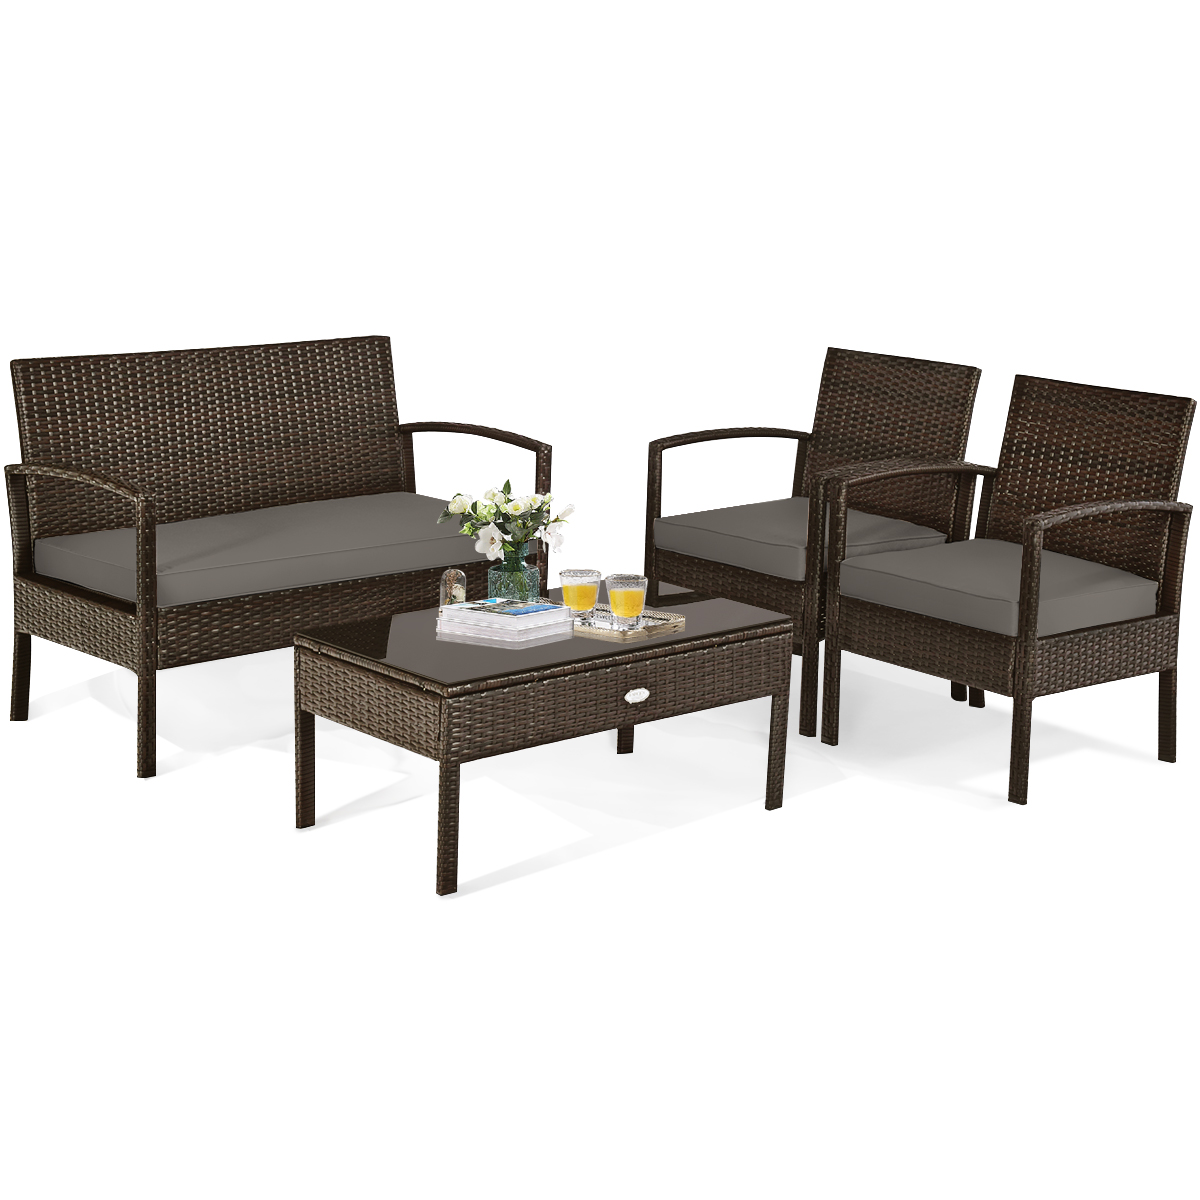 Patiojoy 4 Pieces Outdoor Patio Rattan Furniture Wicker Conversation Set Cushioned - image 1 of 5